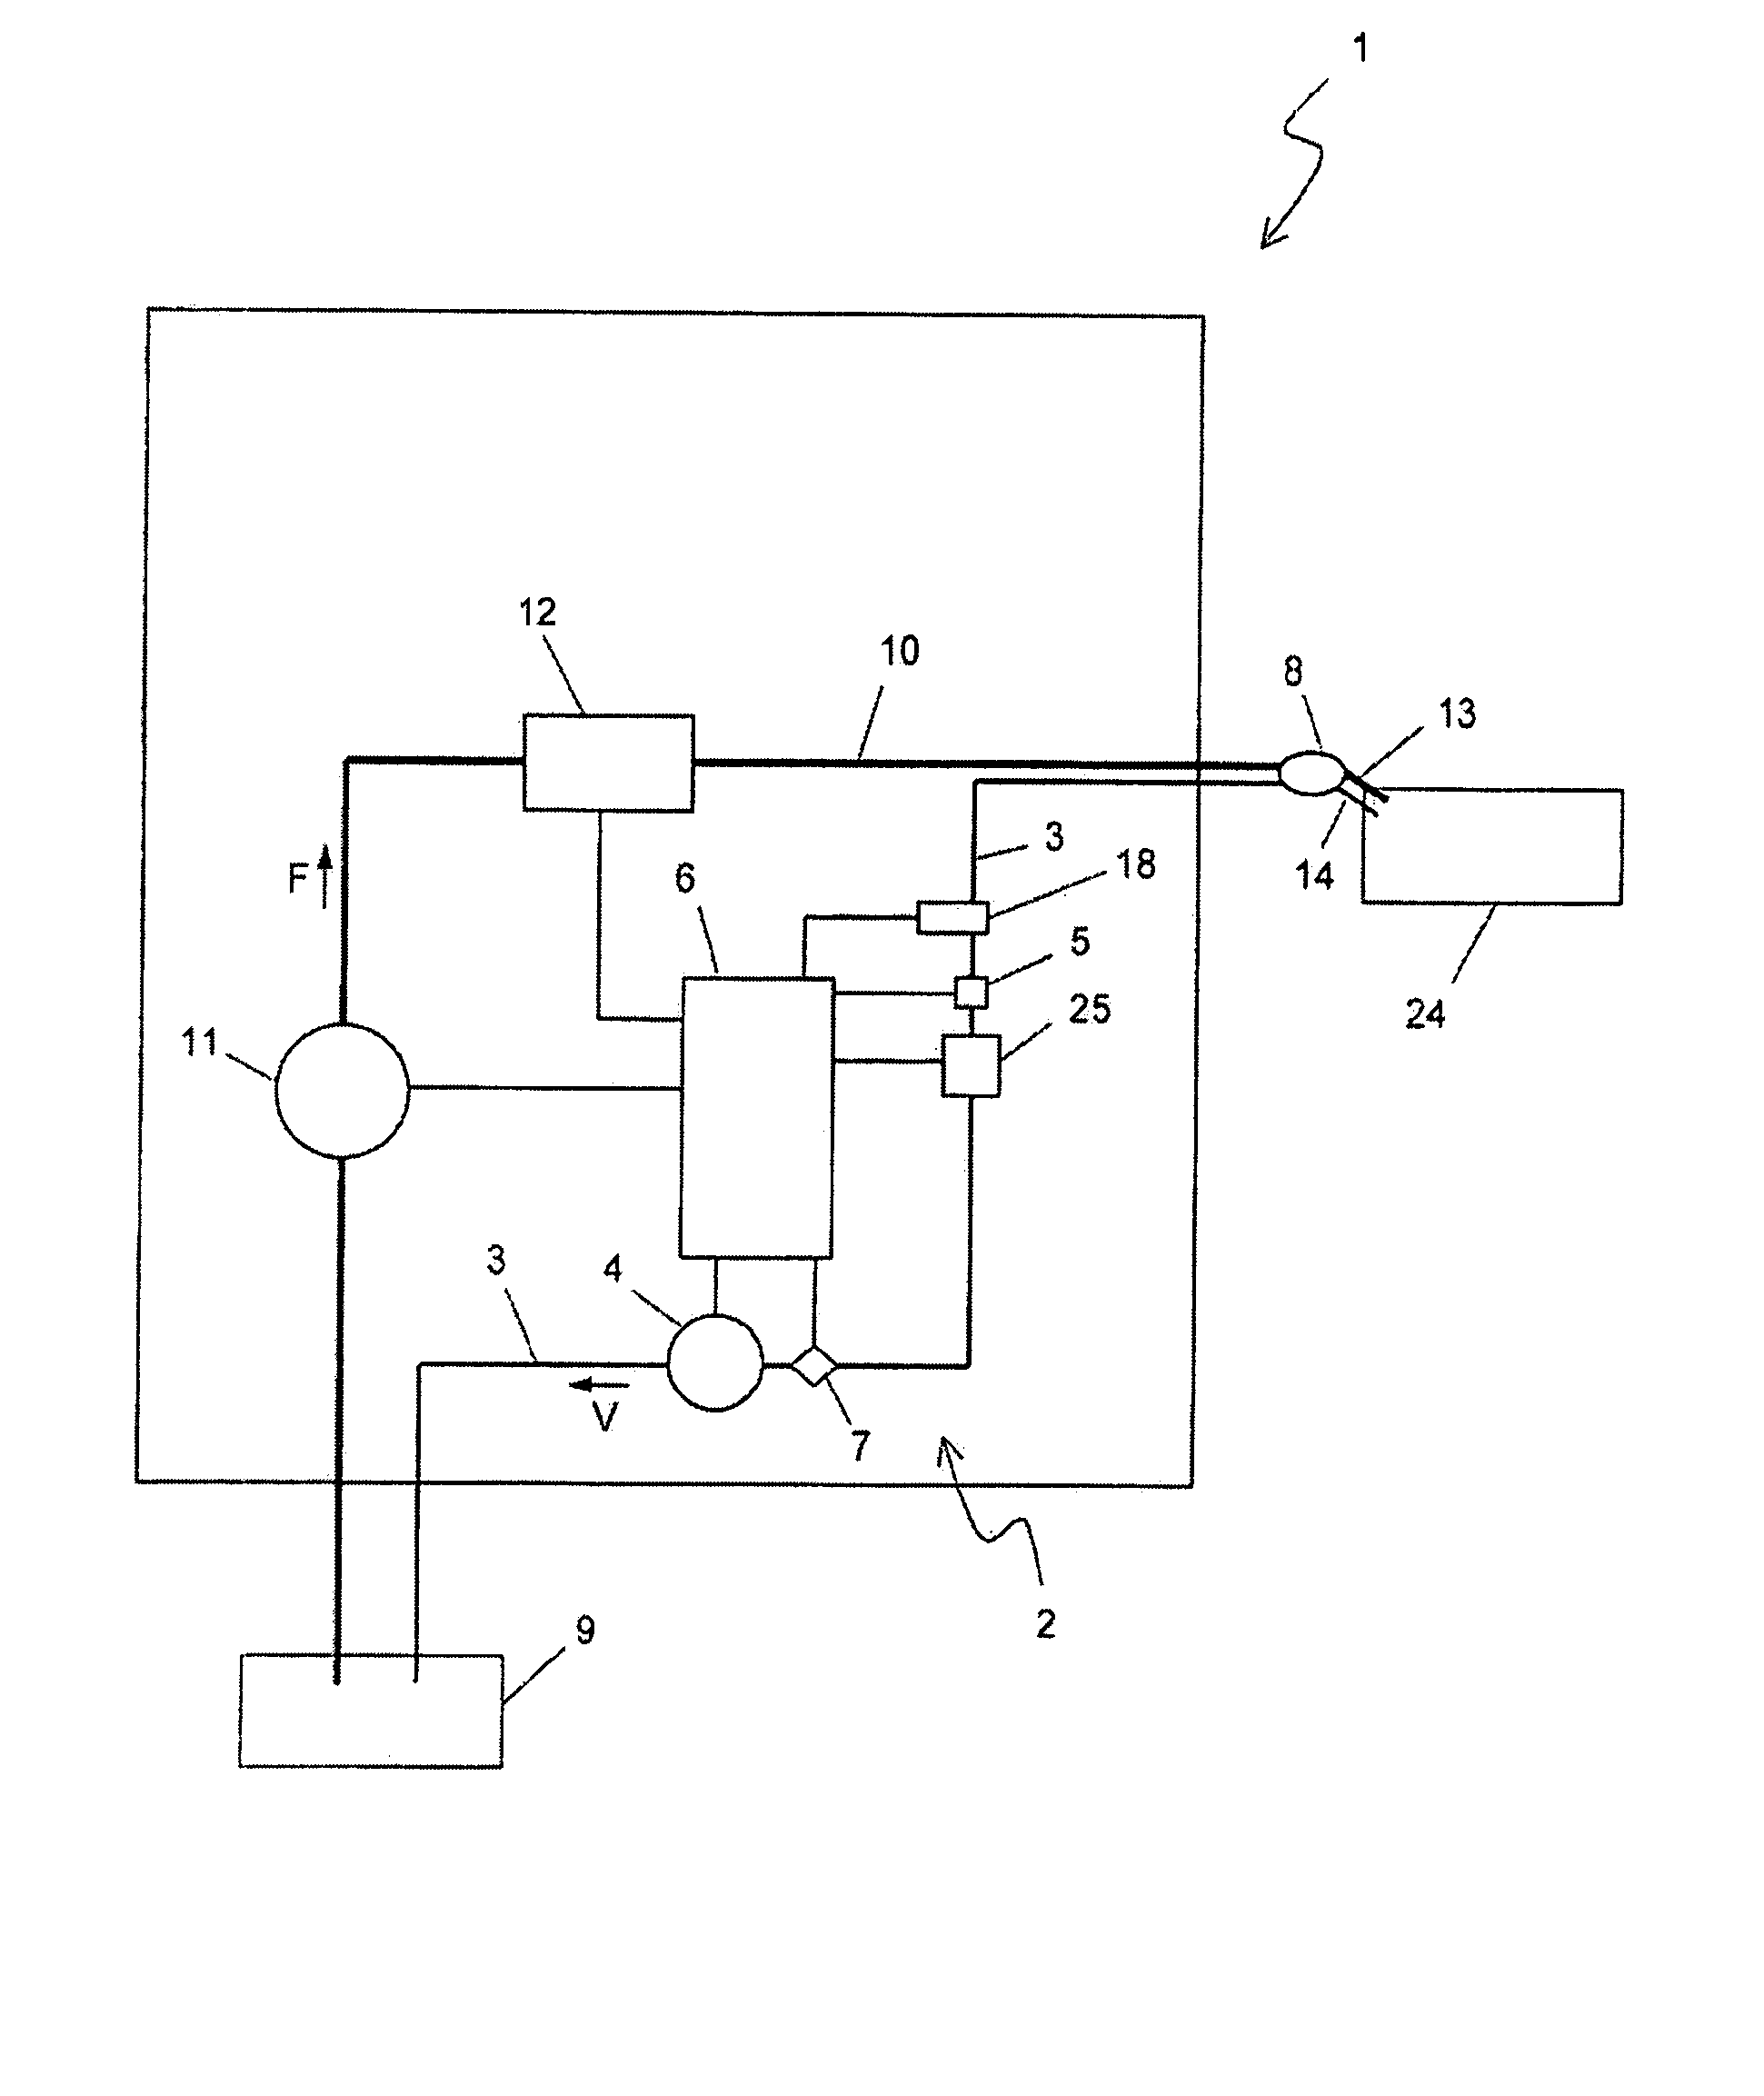 Fuel dispensing unit with on-board refueling vapor recovery detection